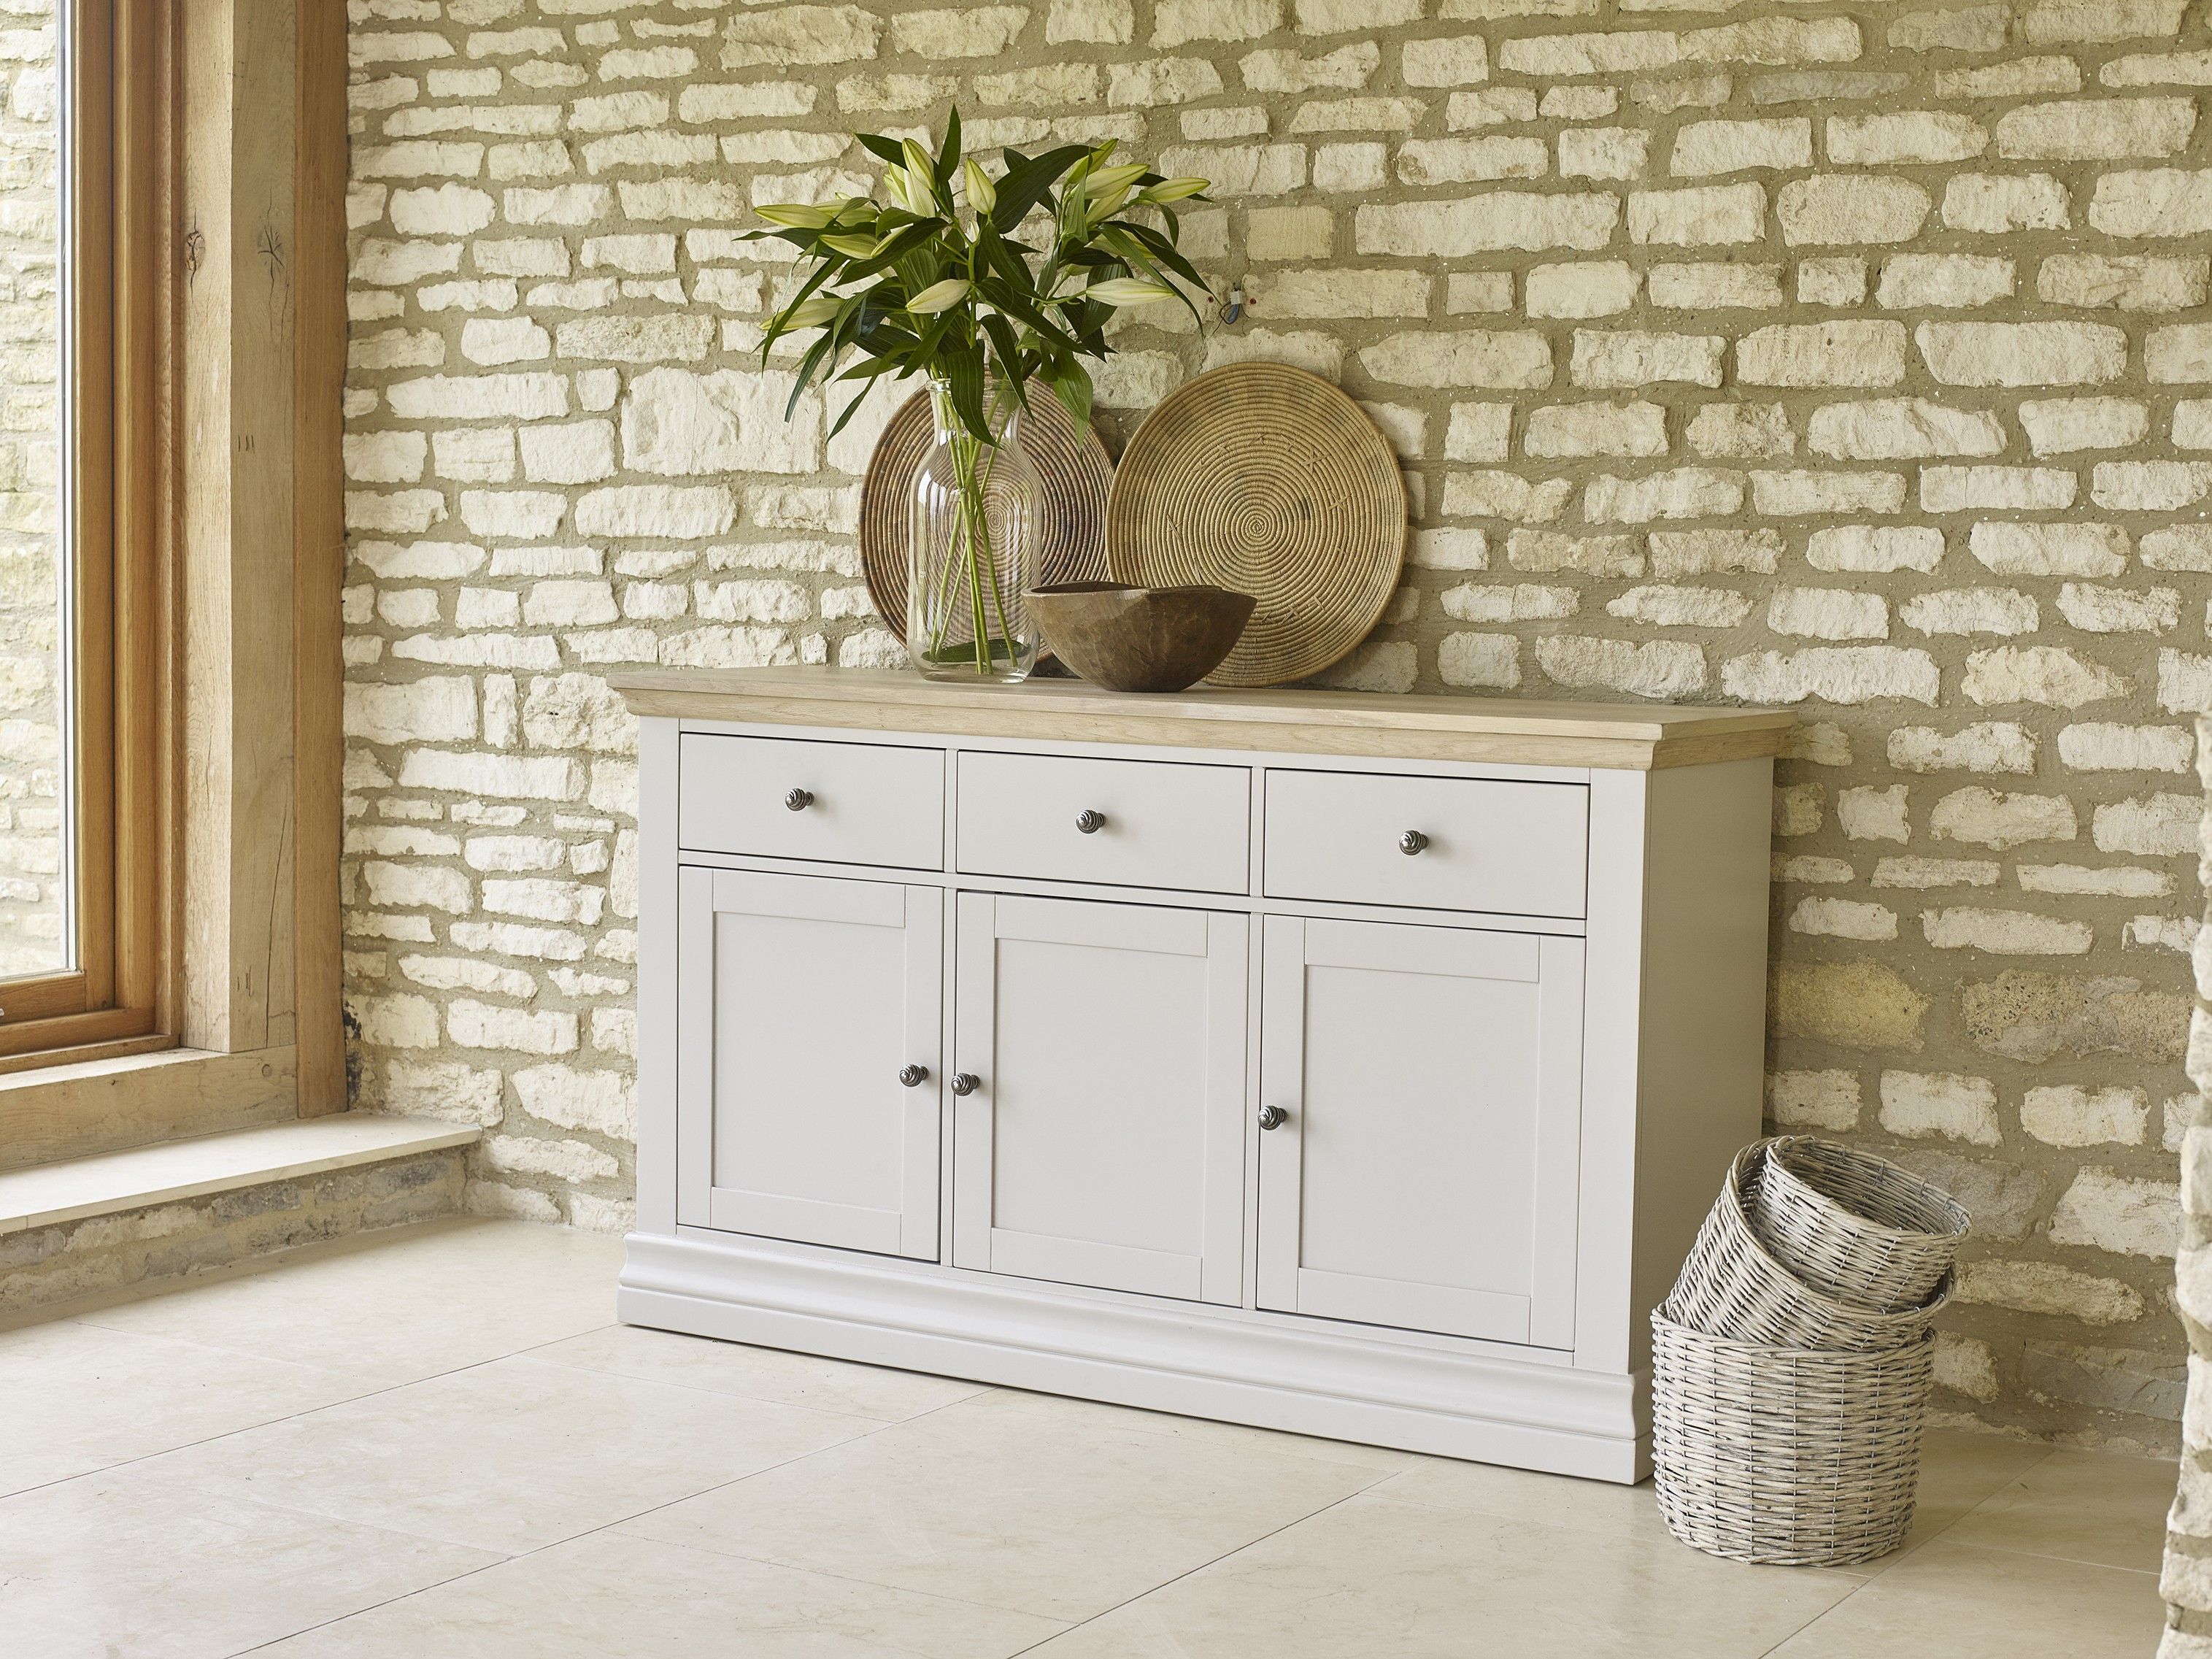 Annecy Large Sideboard – More Options Intended For Annecy Sideboards (View 5 of 30)